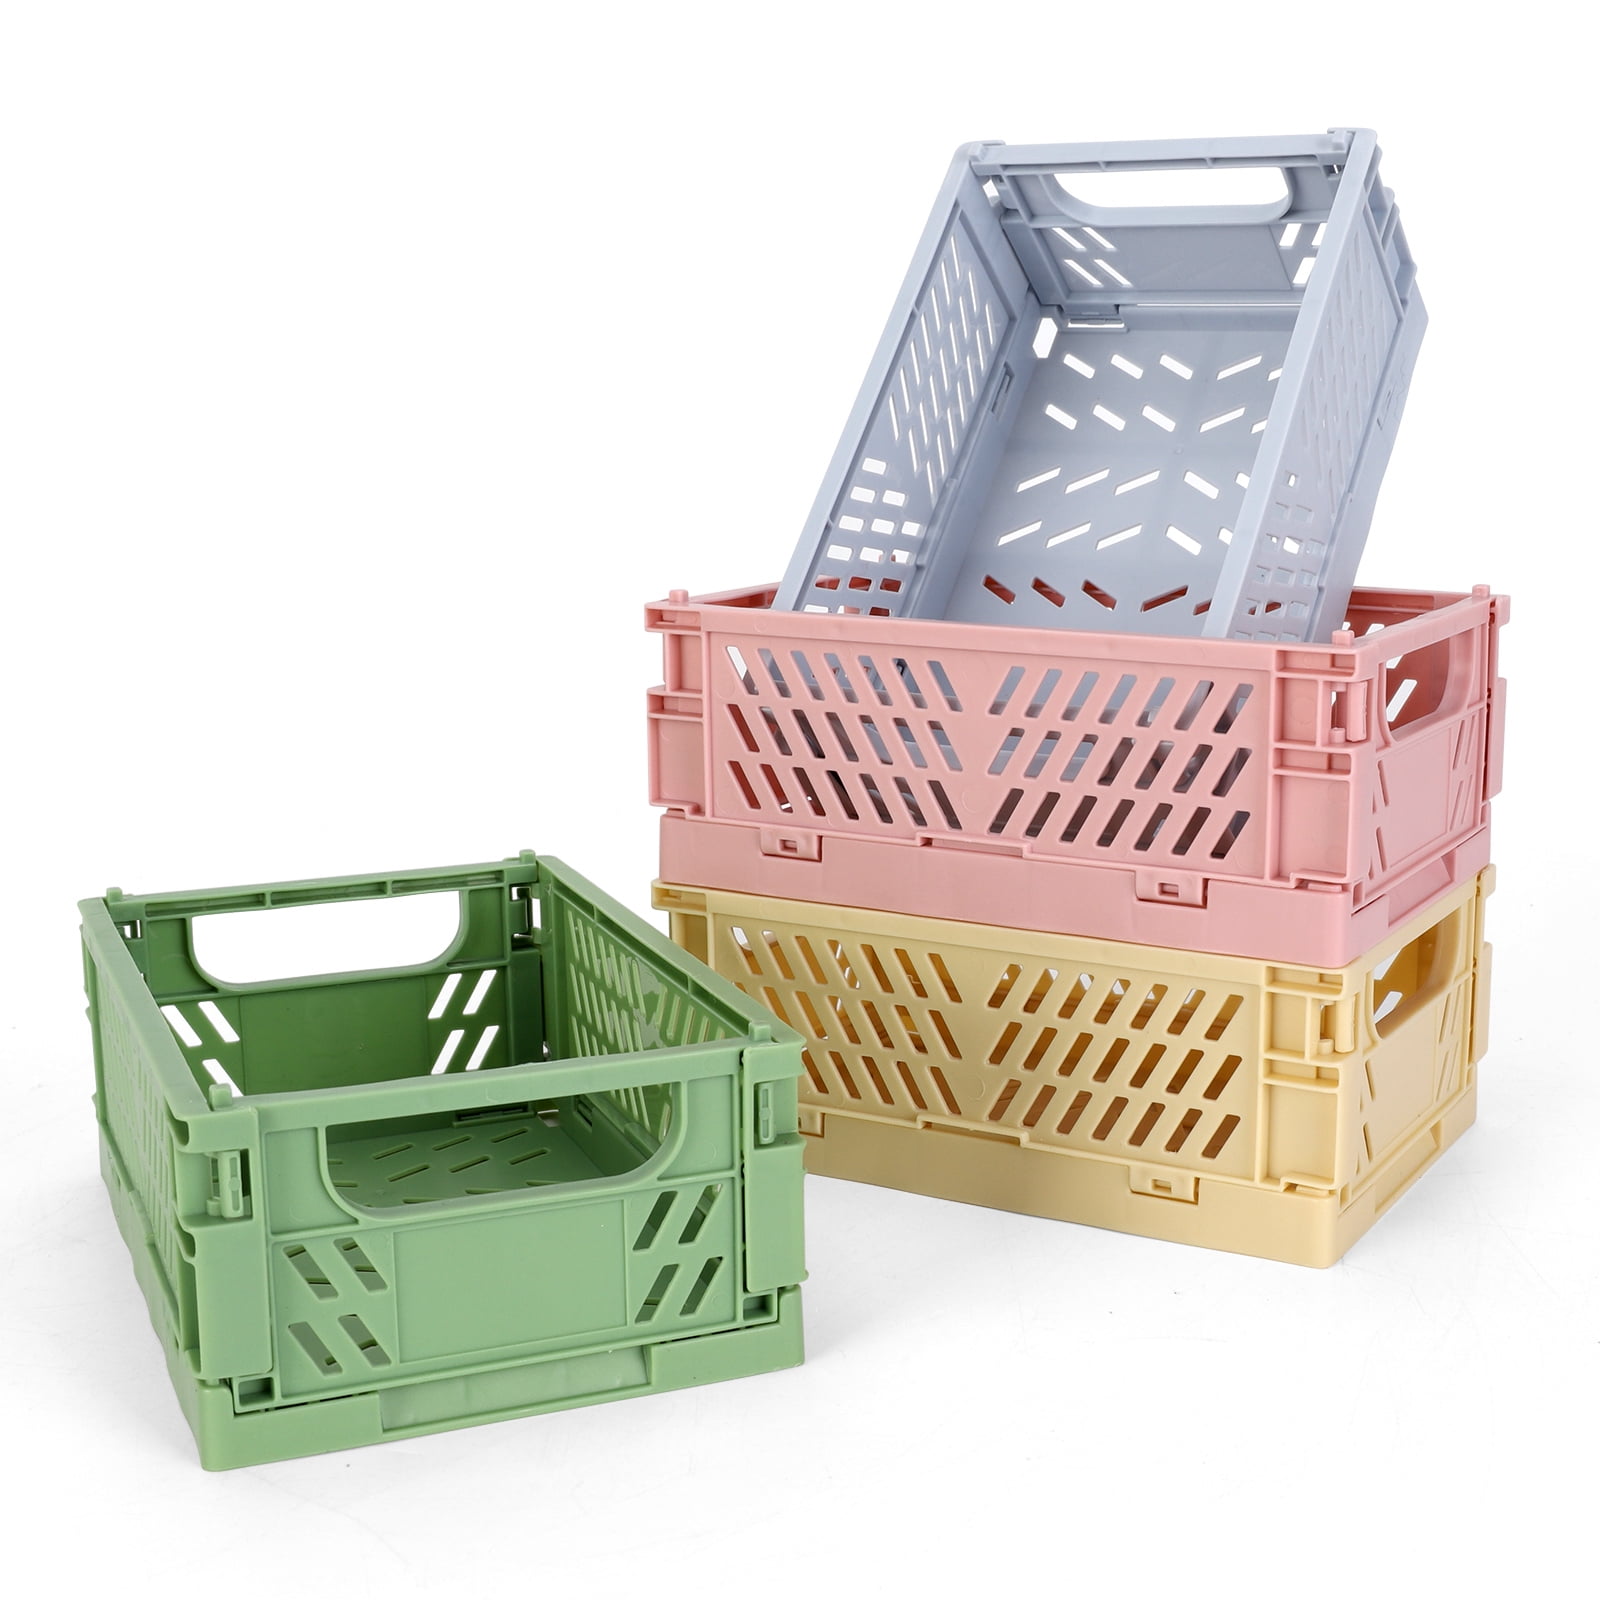 Plastic Storage Basket,2 Pack Mini Collapsible Crate Stacking Folding Storage Baskets for Home Kitchen Bedroom Bathroom Office 5.9 x 3.8 x 2.2 . 